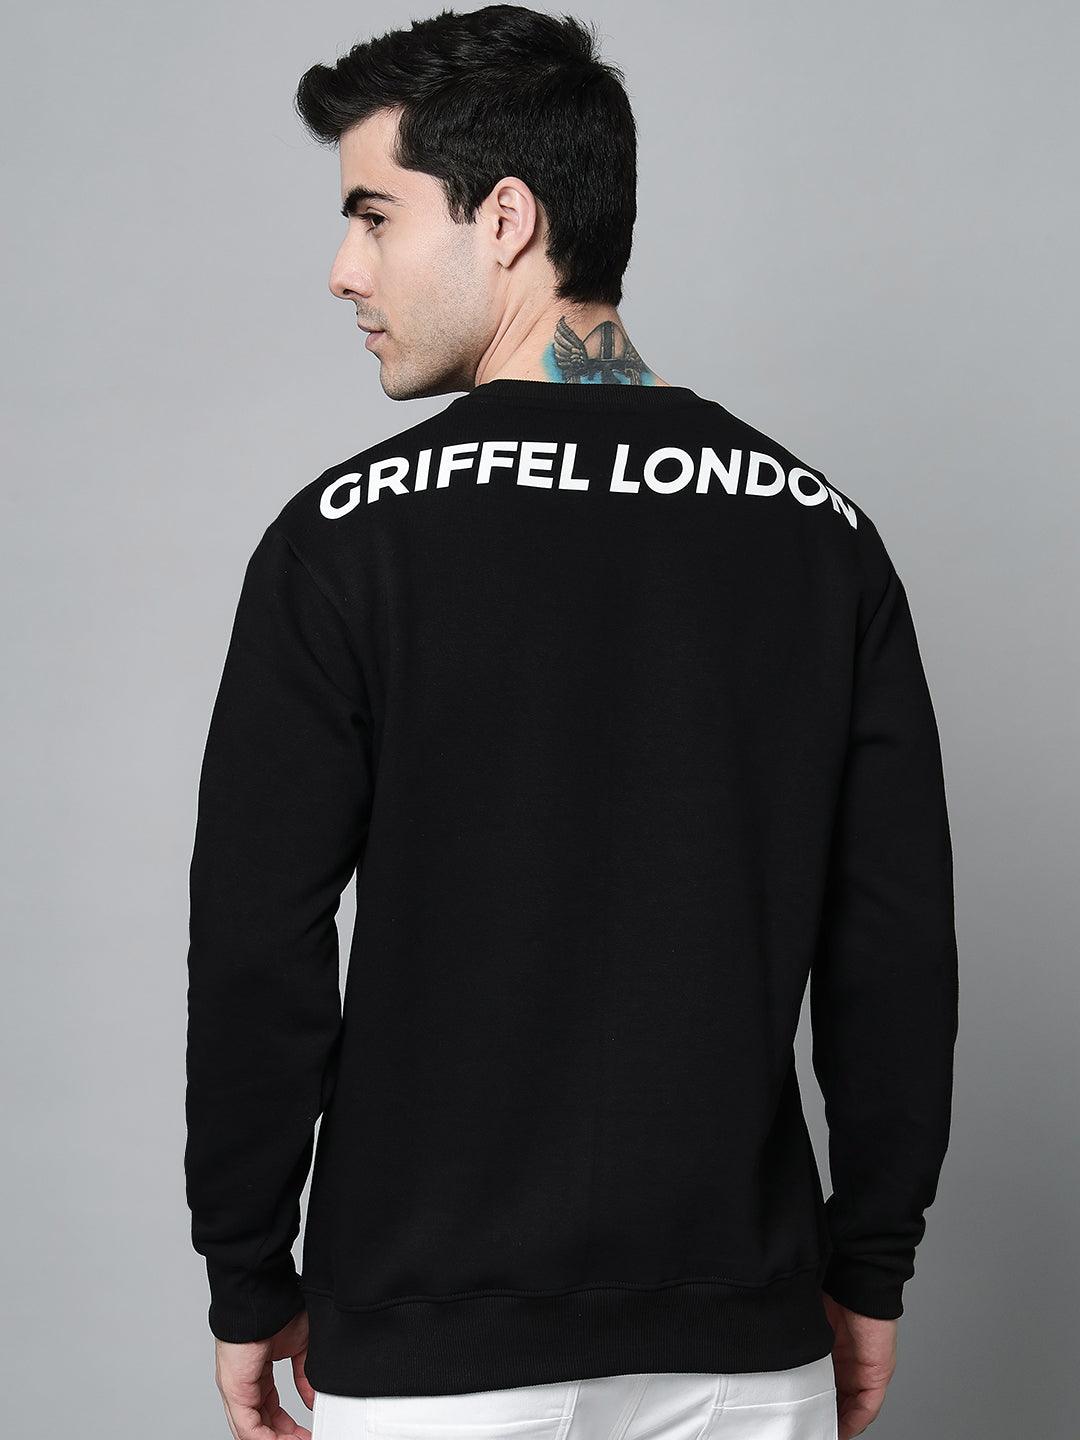 Griffel Men's Cotton Fleece Printed Sweatshirt with Long Sleeve and Front Logo Print - griffel